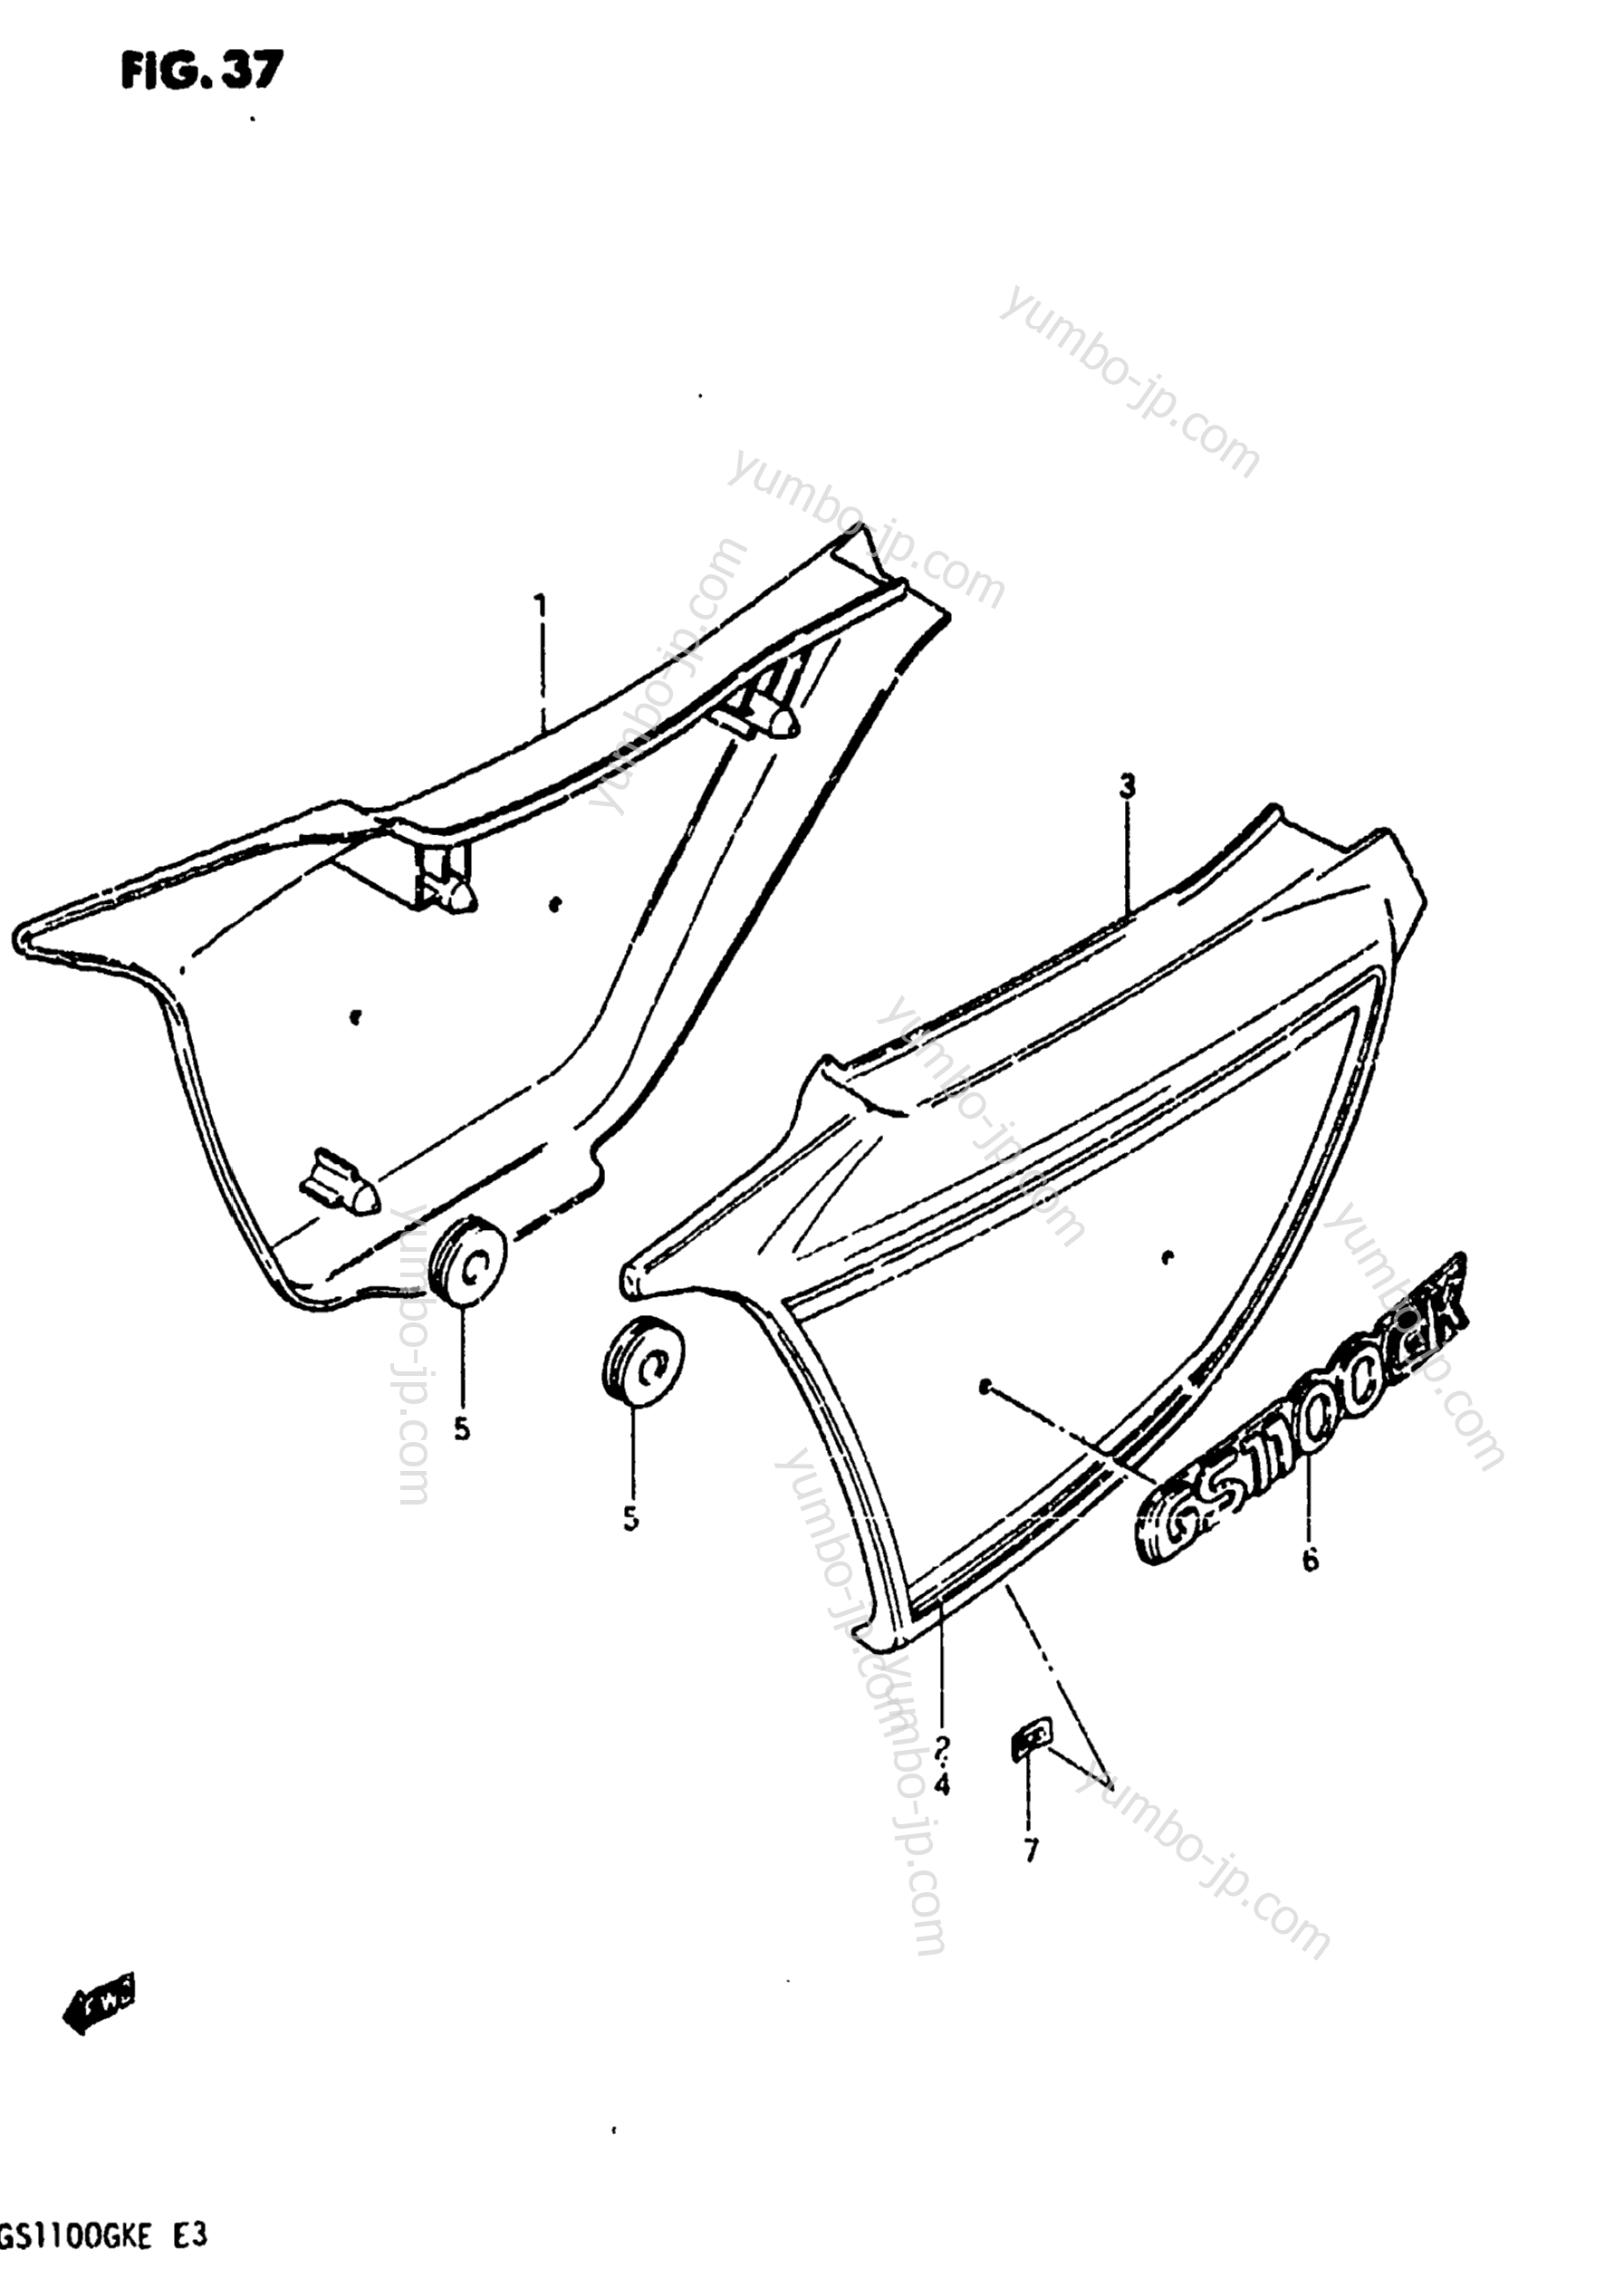 FRAME COVER for motorcycles SUZUKI GKE (GS1100) 1984 year